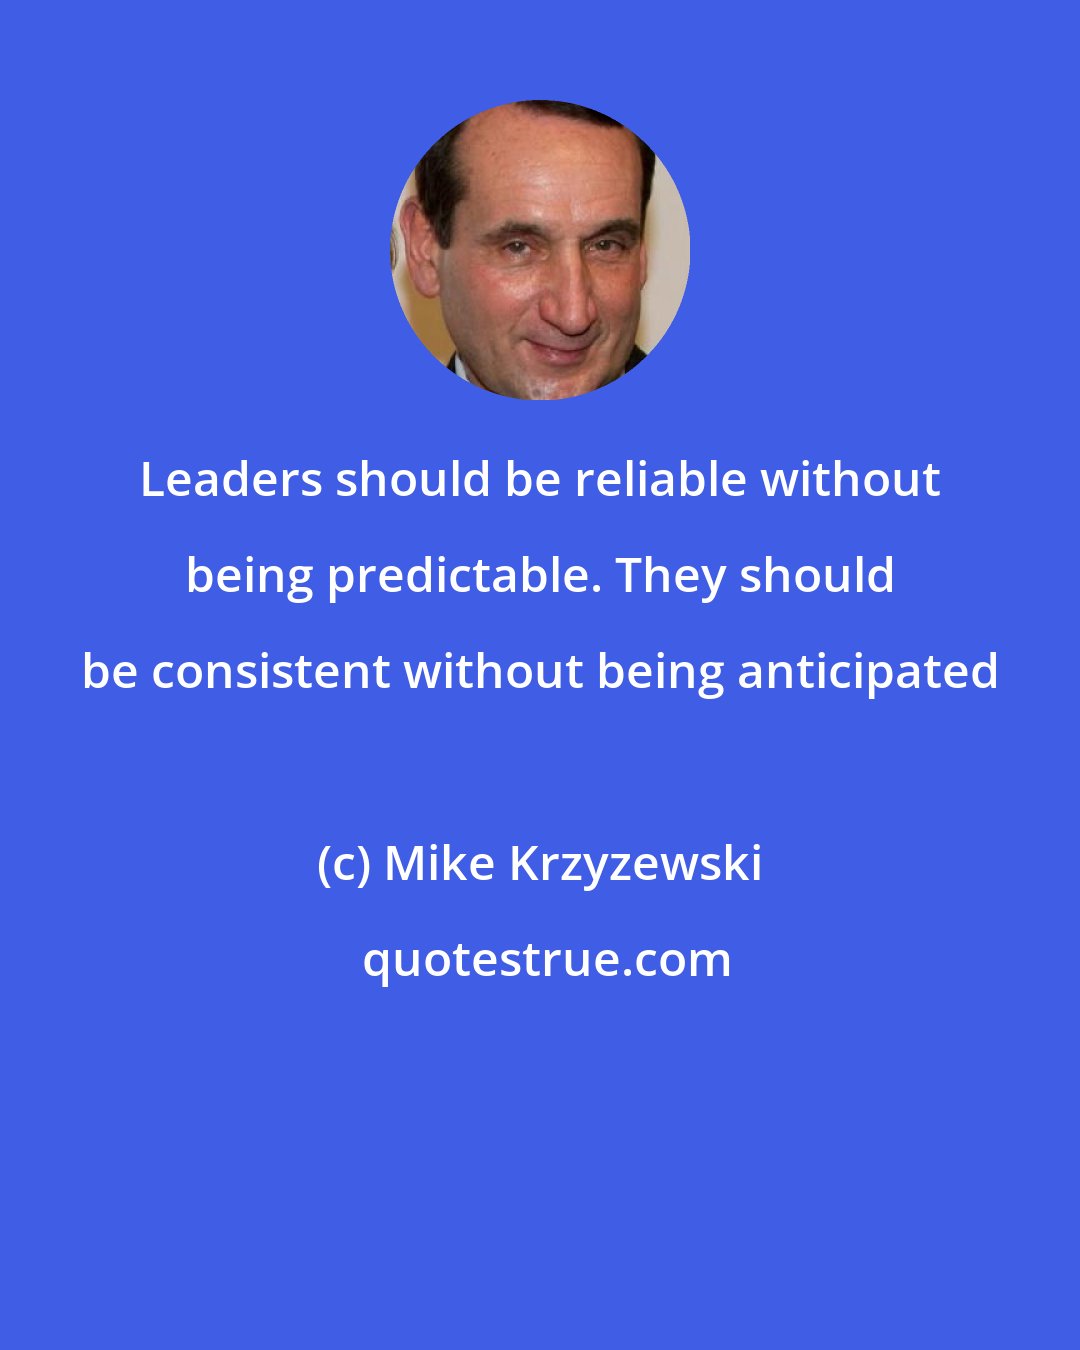 Mike Krzyzewski: Leaders should be reliable without being predictable. They should be consistent without being anticipated